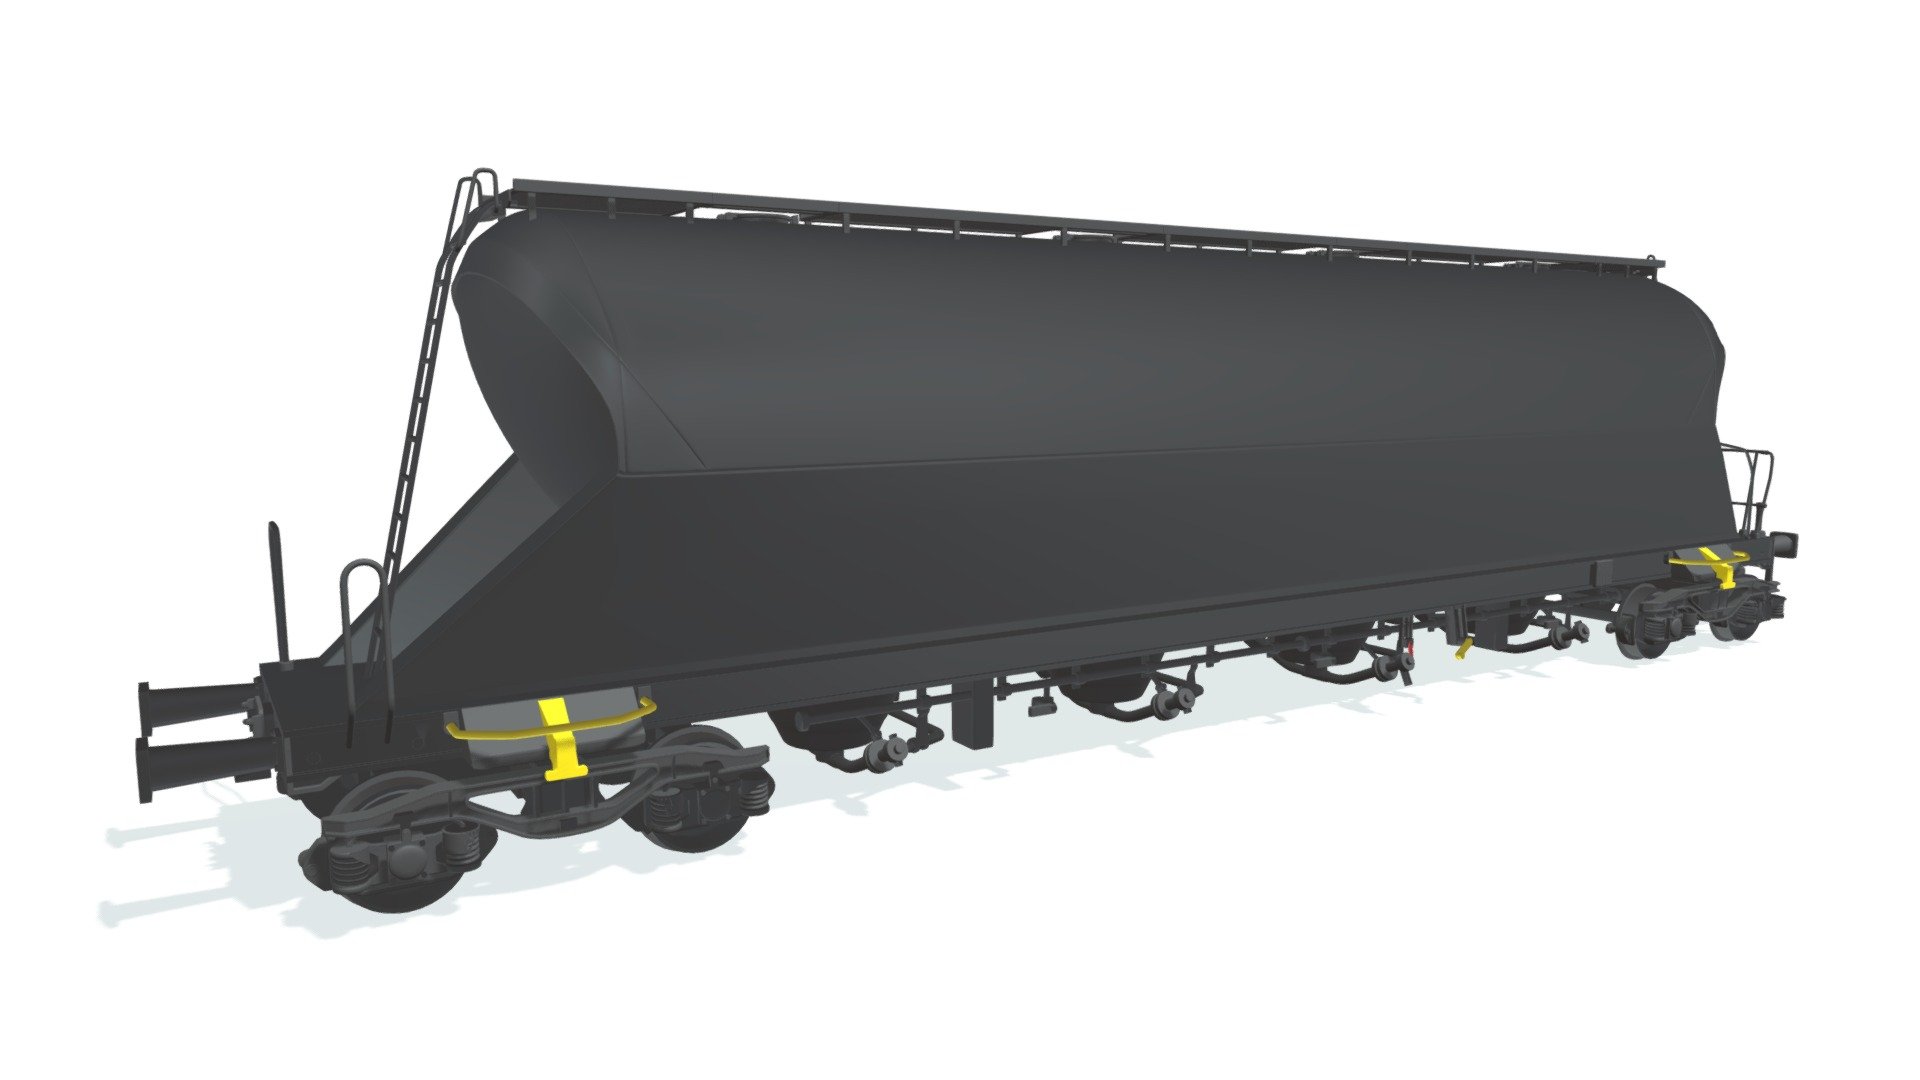 High quality 3d model of railroad silo tank train car.
All colors, text, logo can be easily modified 3d model